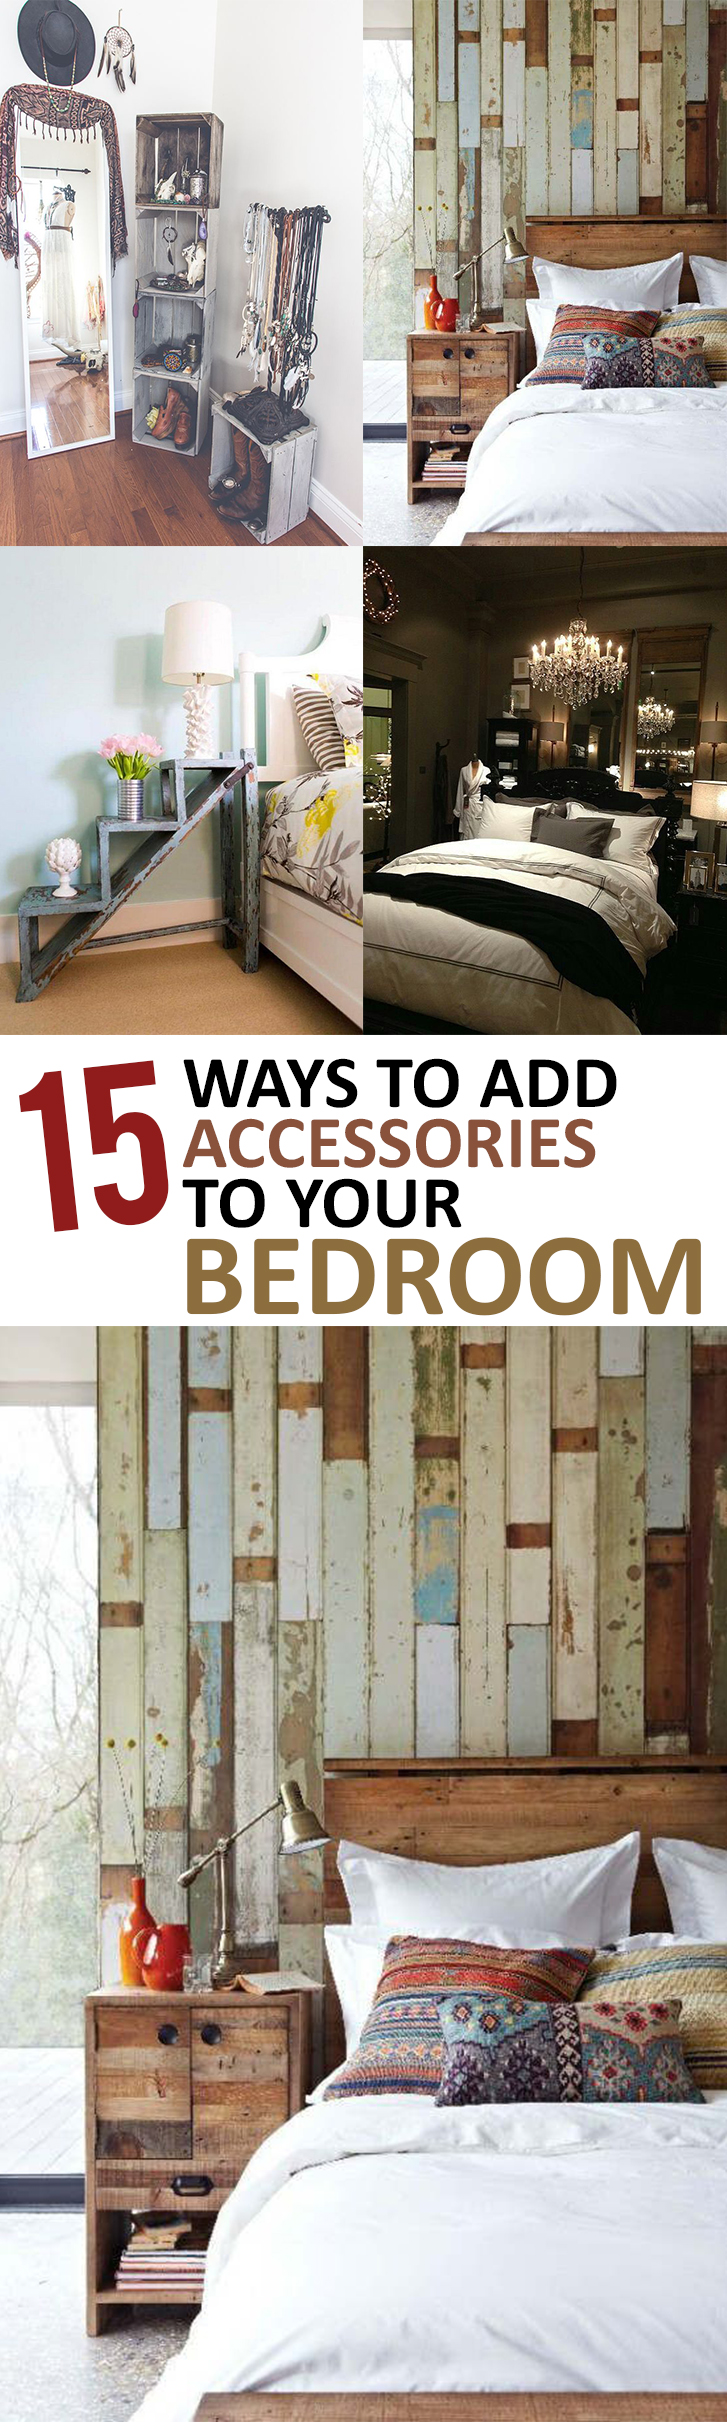 15 Ways to Add Accessories to Your Bedroom 